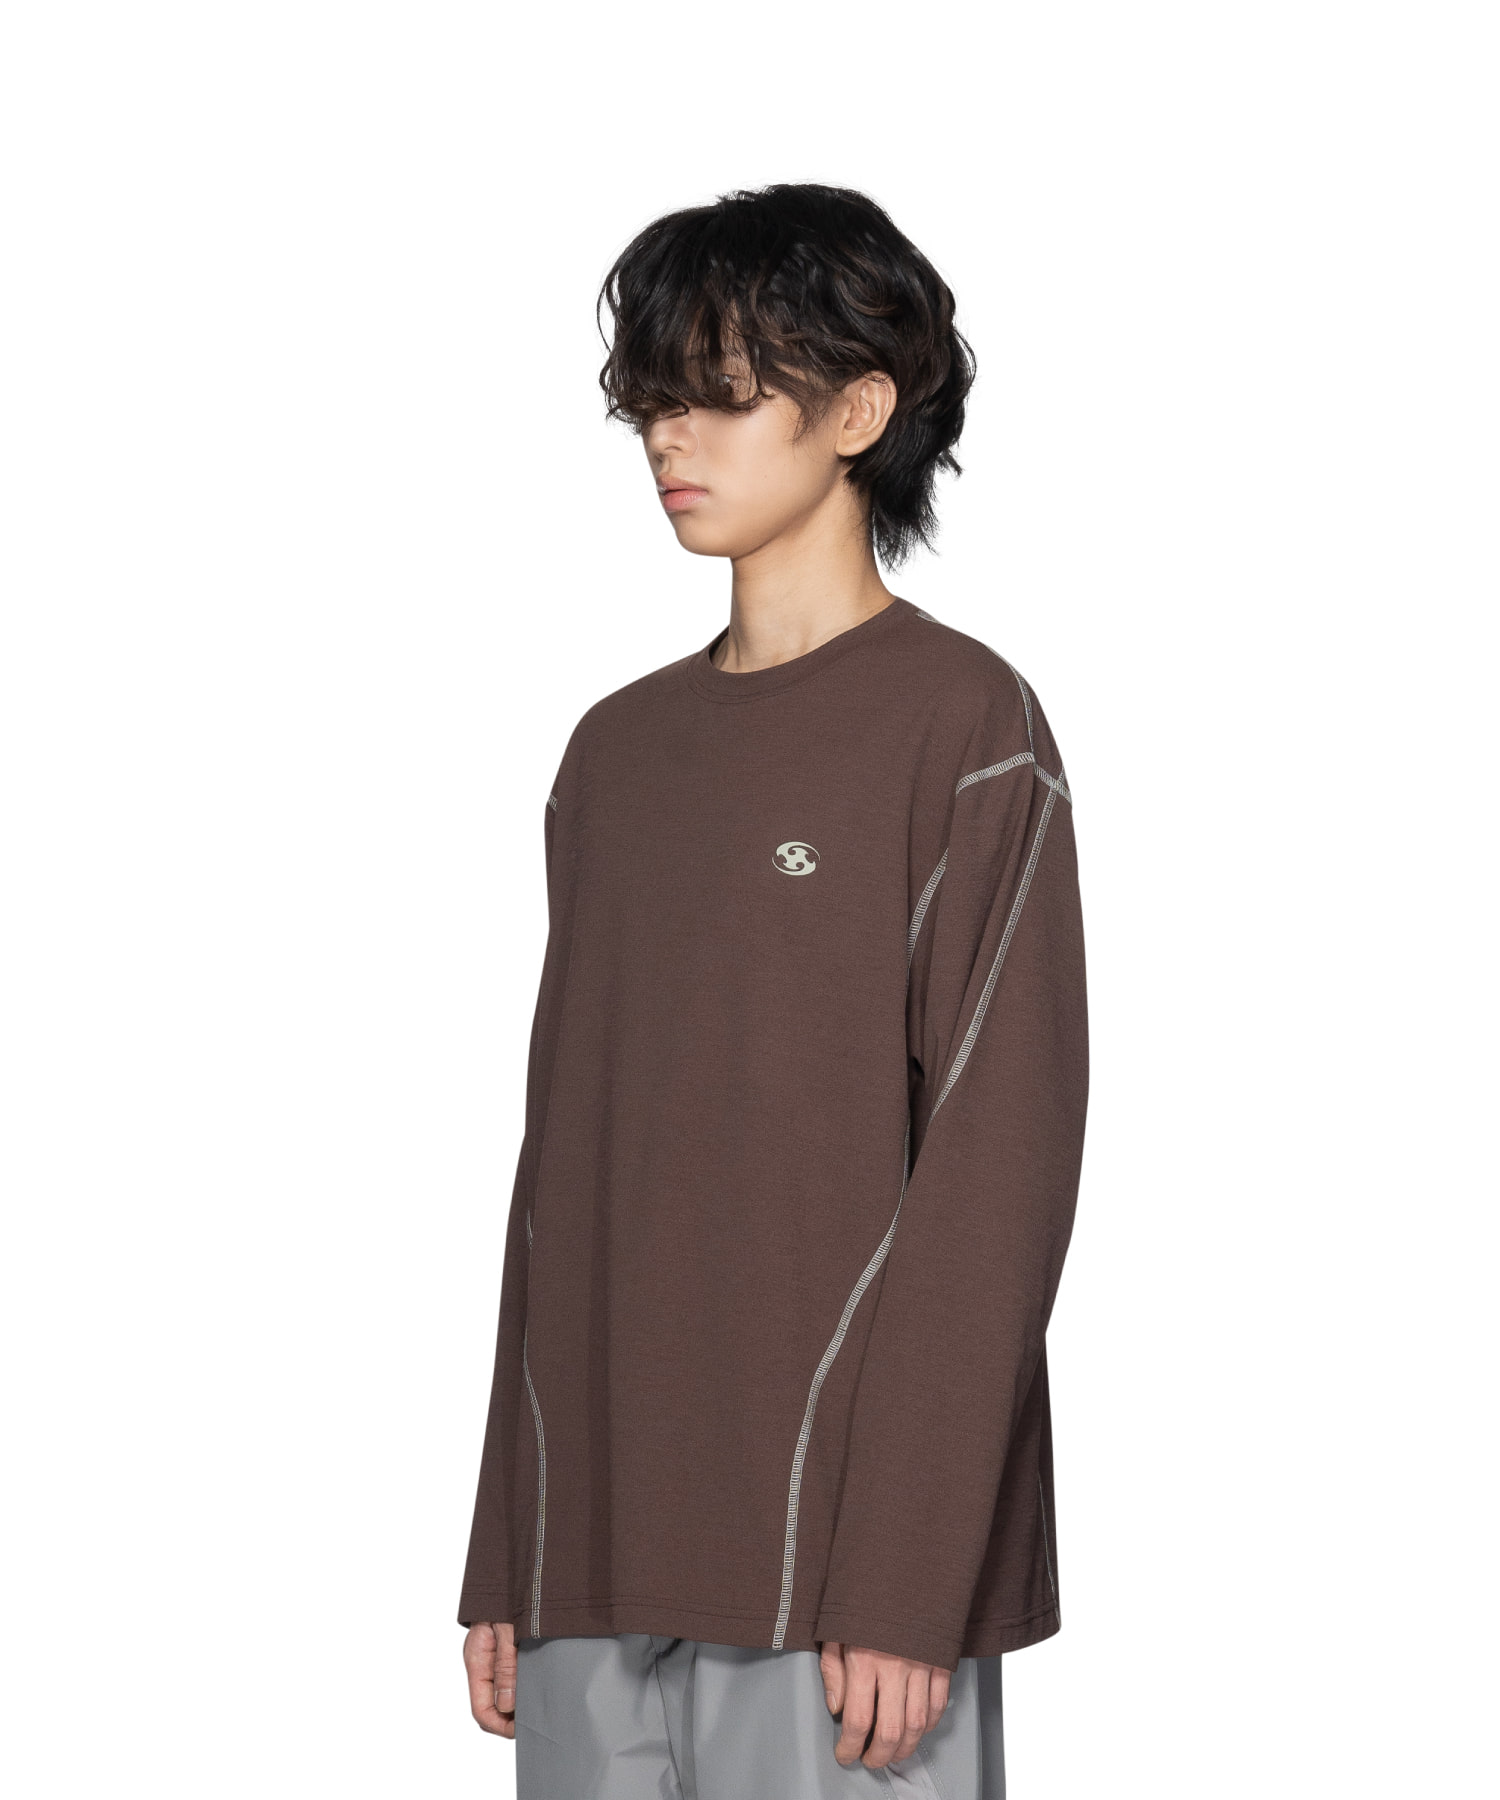 23FW STITCH LONG SLEEVES BROWN